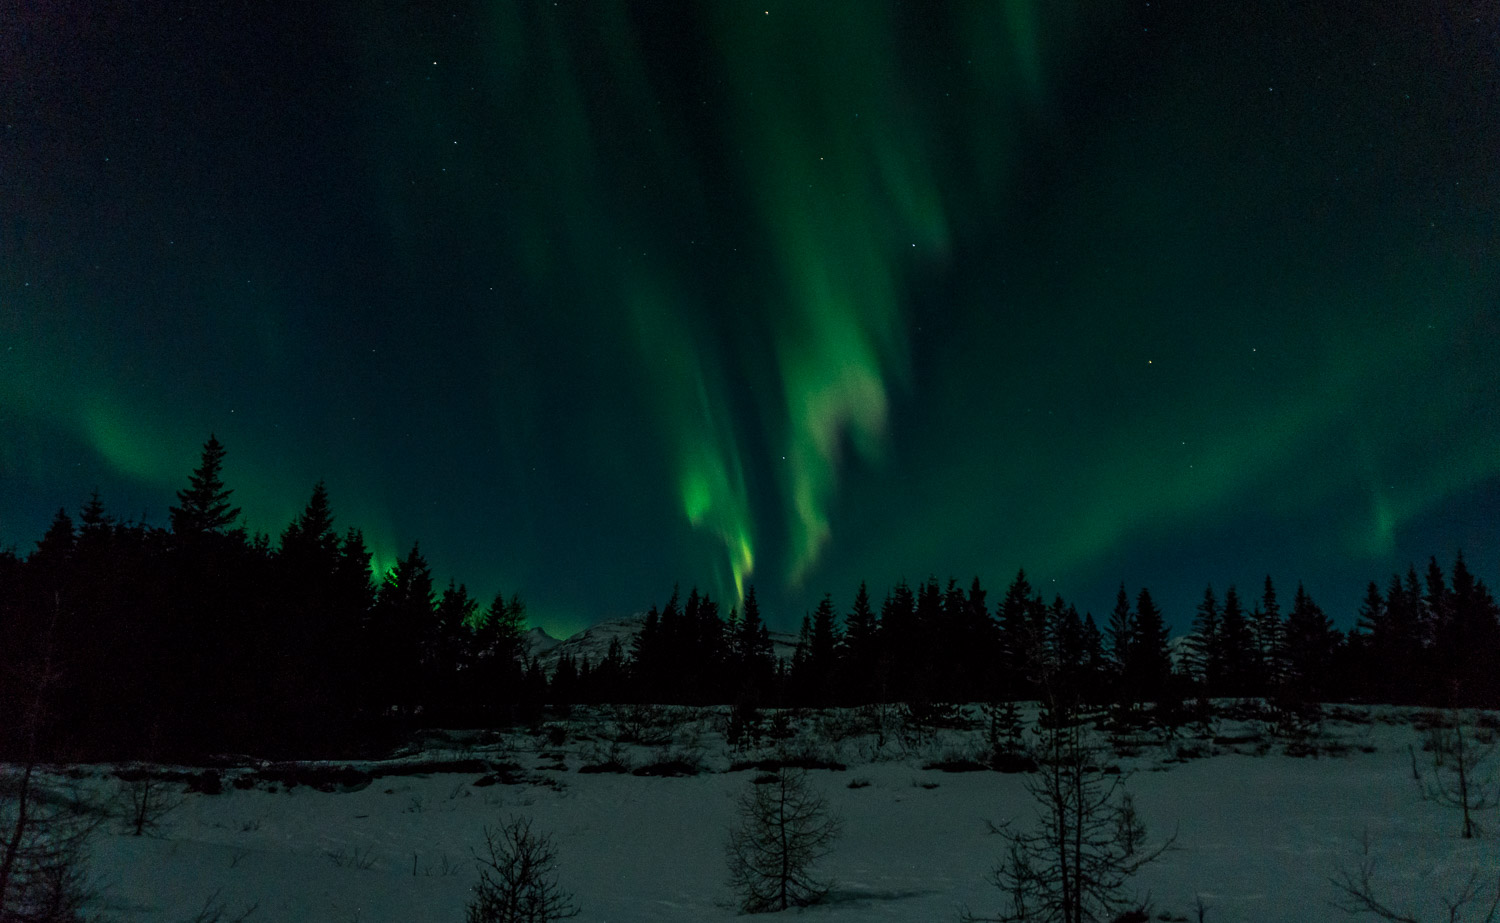 Northern lights tour, Aurora boreal, guided tours, super jeep tours, winter